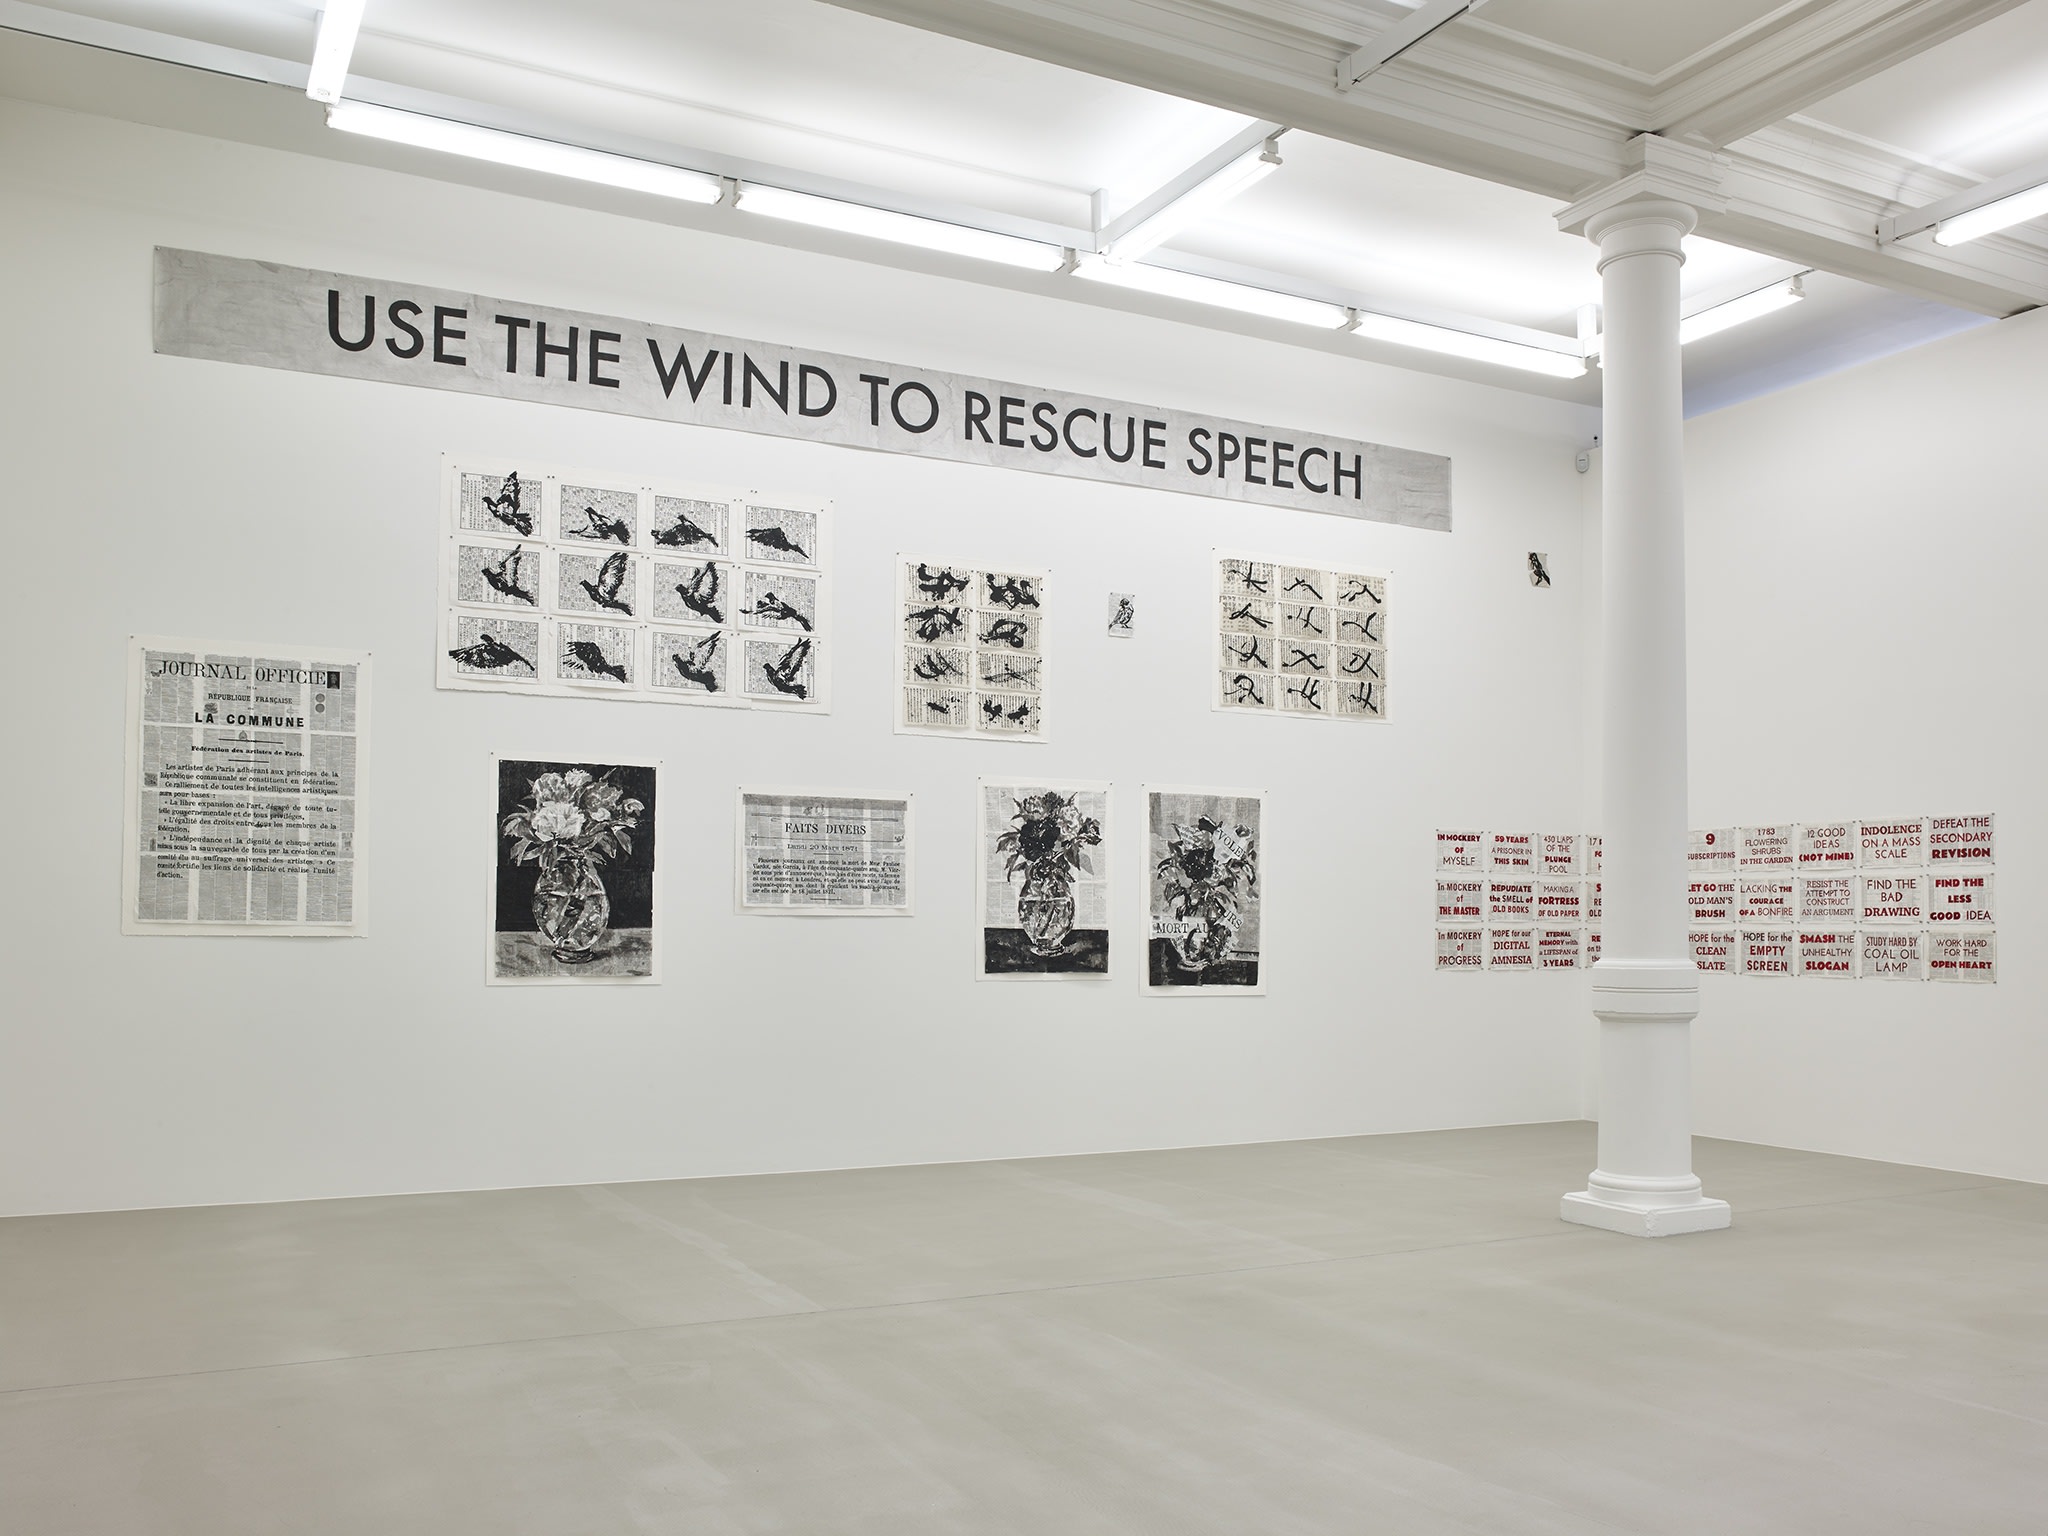 In a large white space with columns, many black and white paintings hang, of various sizes, all made up of smaller pieces of paper, except a large sign which hangs overhead, reading: USE THE WIND TO RESCUE SPEECH.